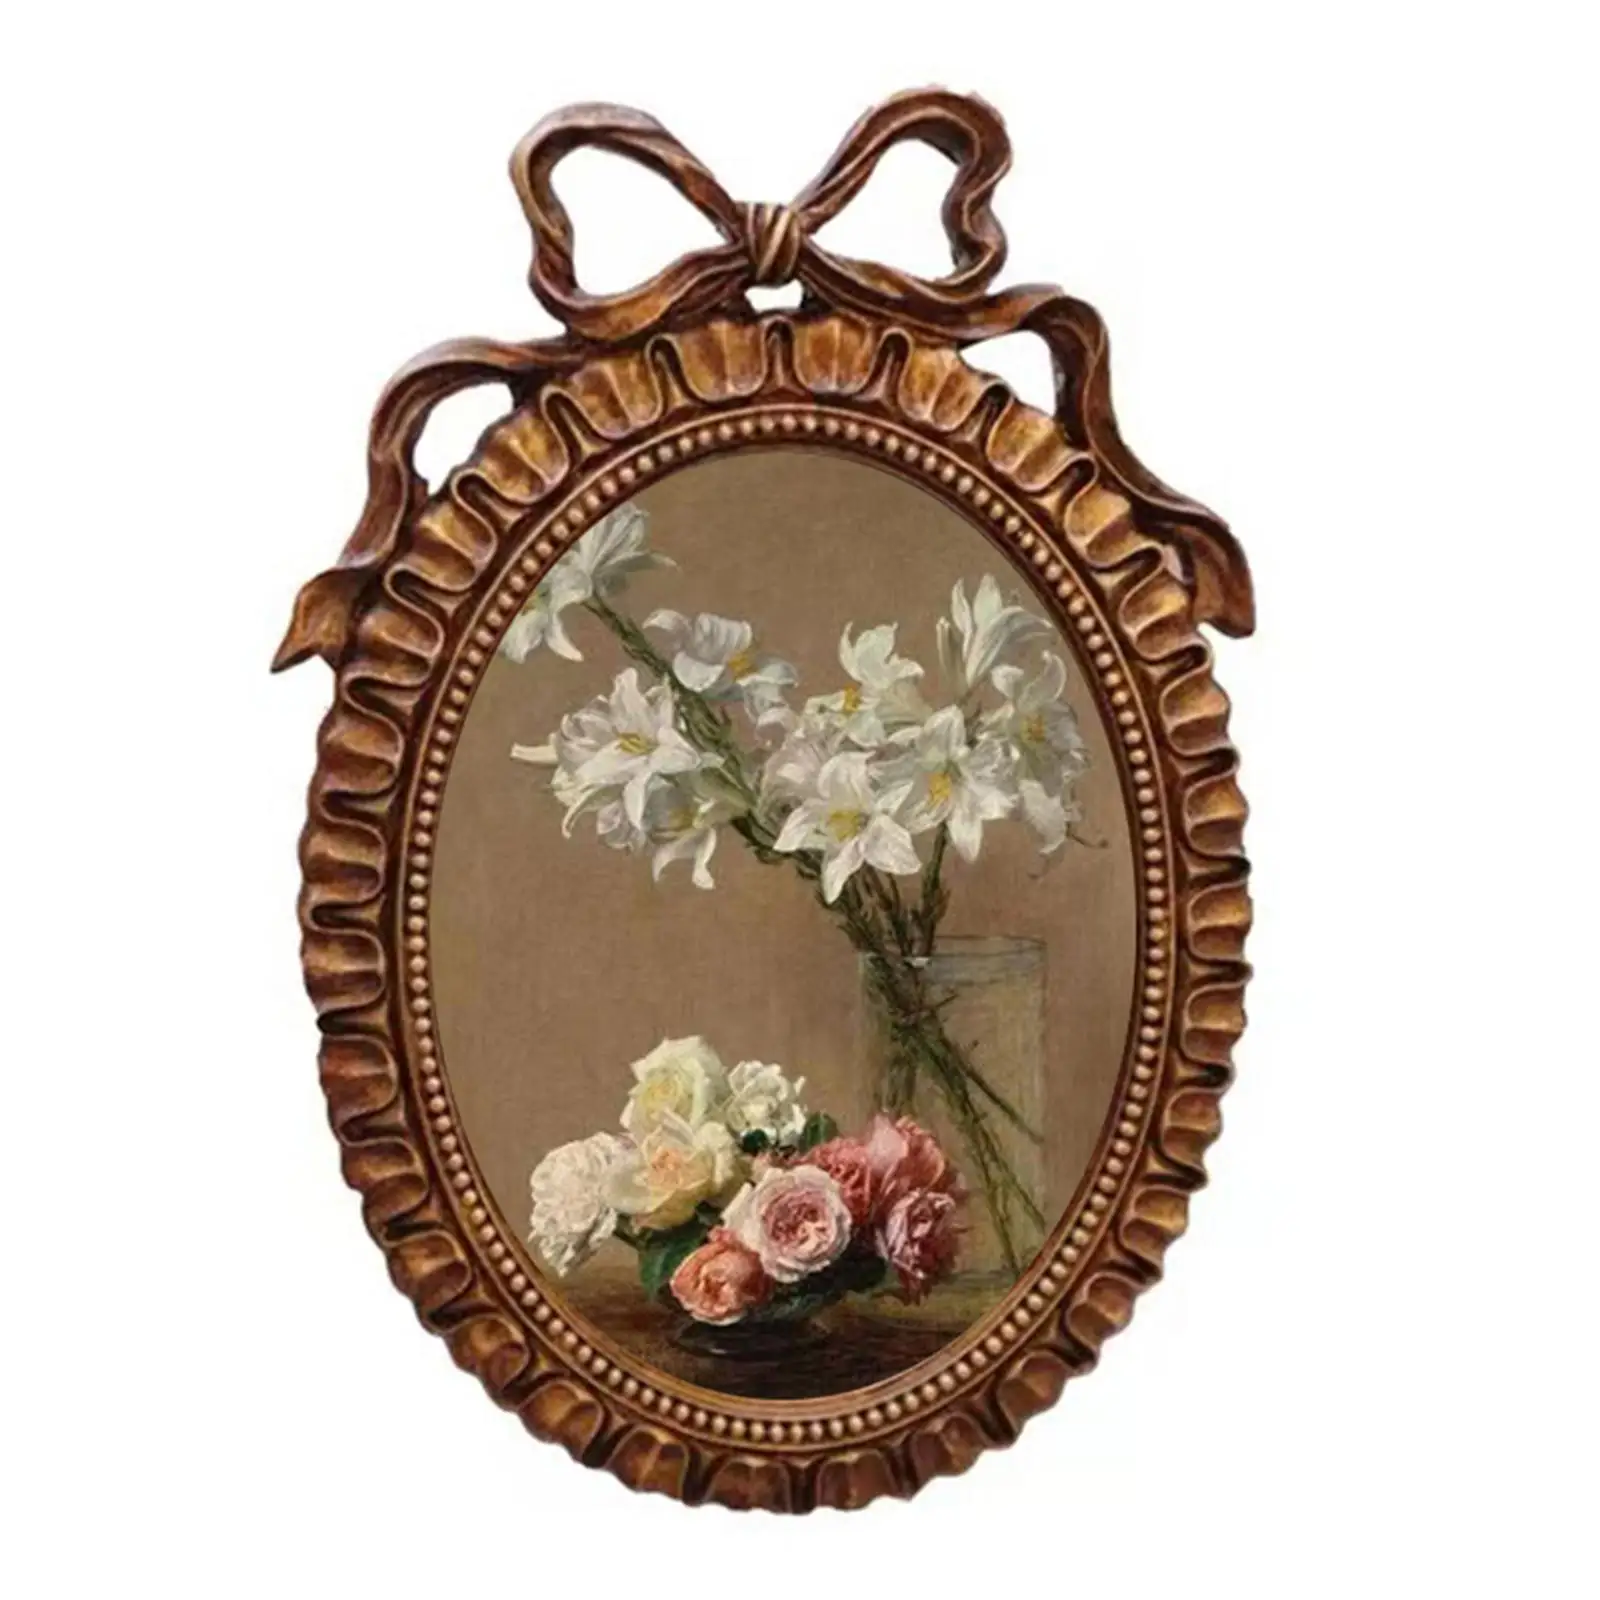 European Style Antique Oval Resin Photo Frame, Wall Mounting for 12x18cm Photo Decoration Gift Home Decor Photo Gallery Art